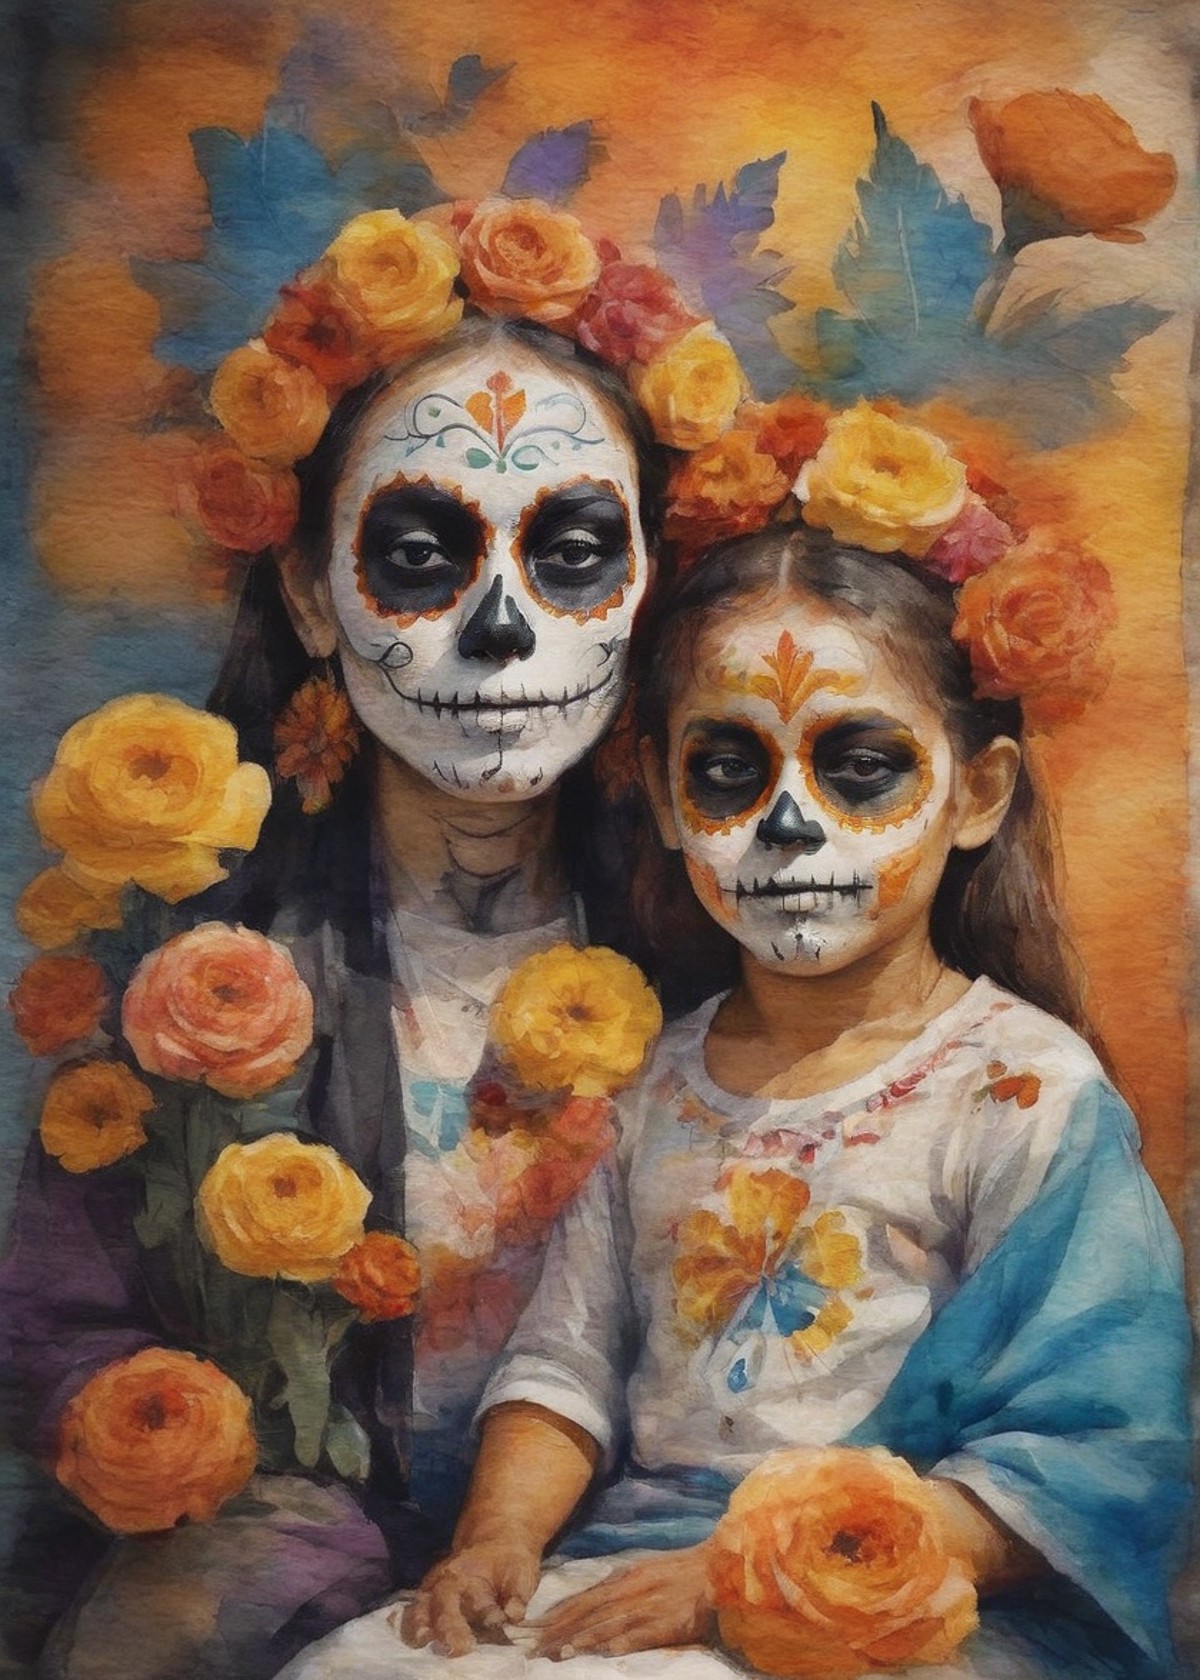 A vibrant Day of the Dead celebration in Mexico with families honoring their ancestors with altars and marigolds